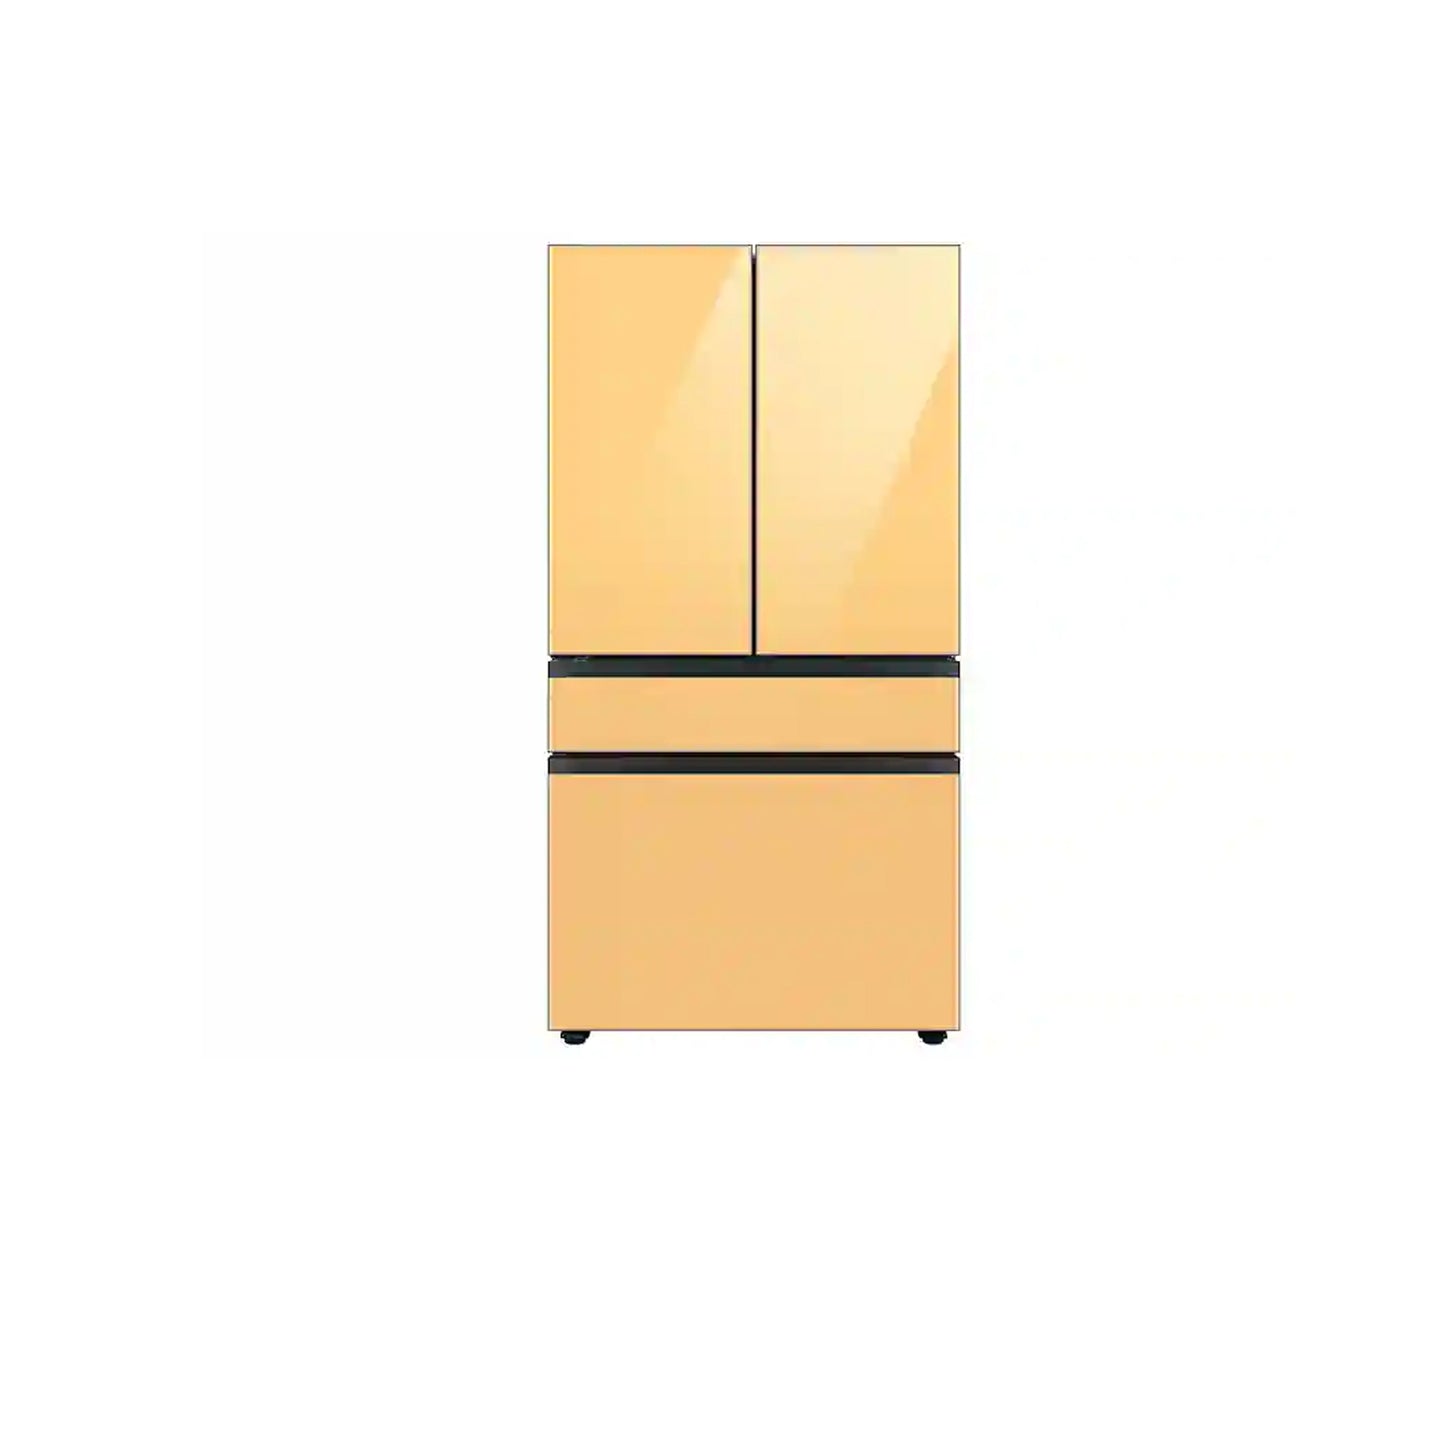 Bespoke 4-Door French Door Refrigerator (29 cu. ft.) with Beverage Center™ in Morning Blue Glass Top Panels and White Glass Middle and Bottom Panels.